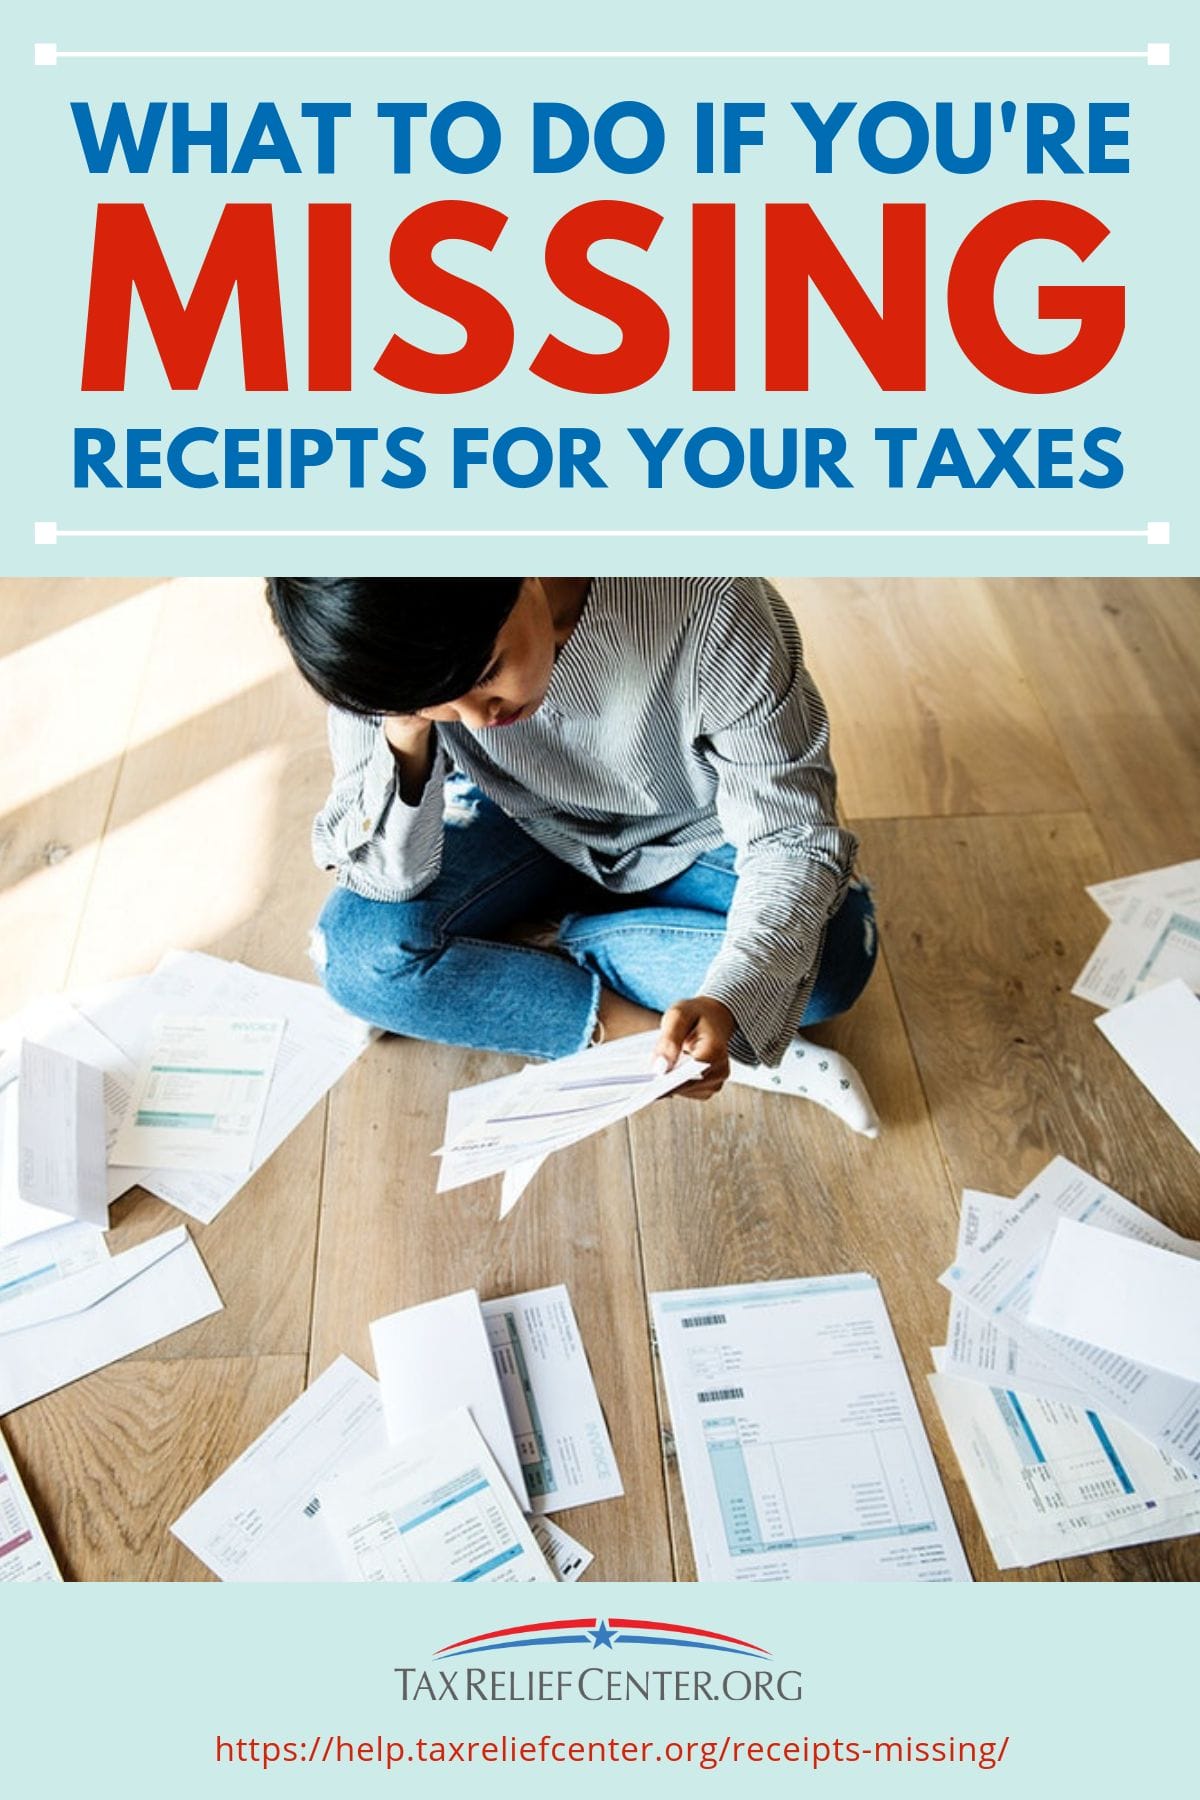 What To Do If You're Missing Receipts For Your Taxes https://help.taxreliefcenter.org/receipts-missing/